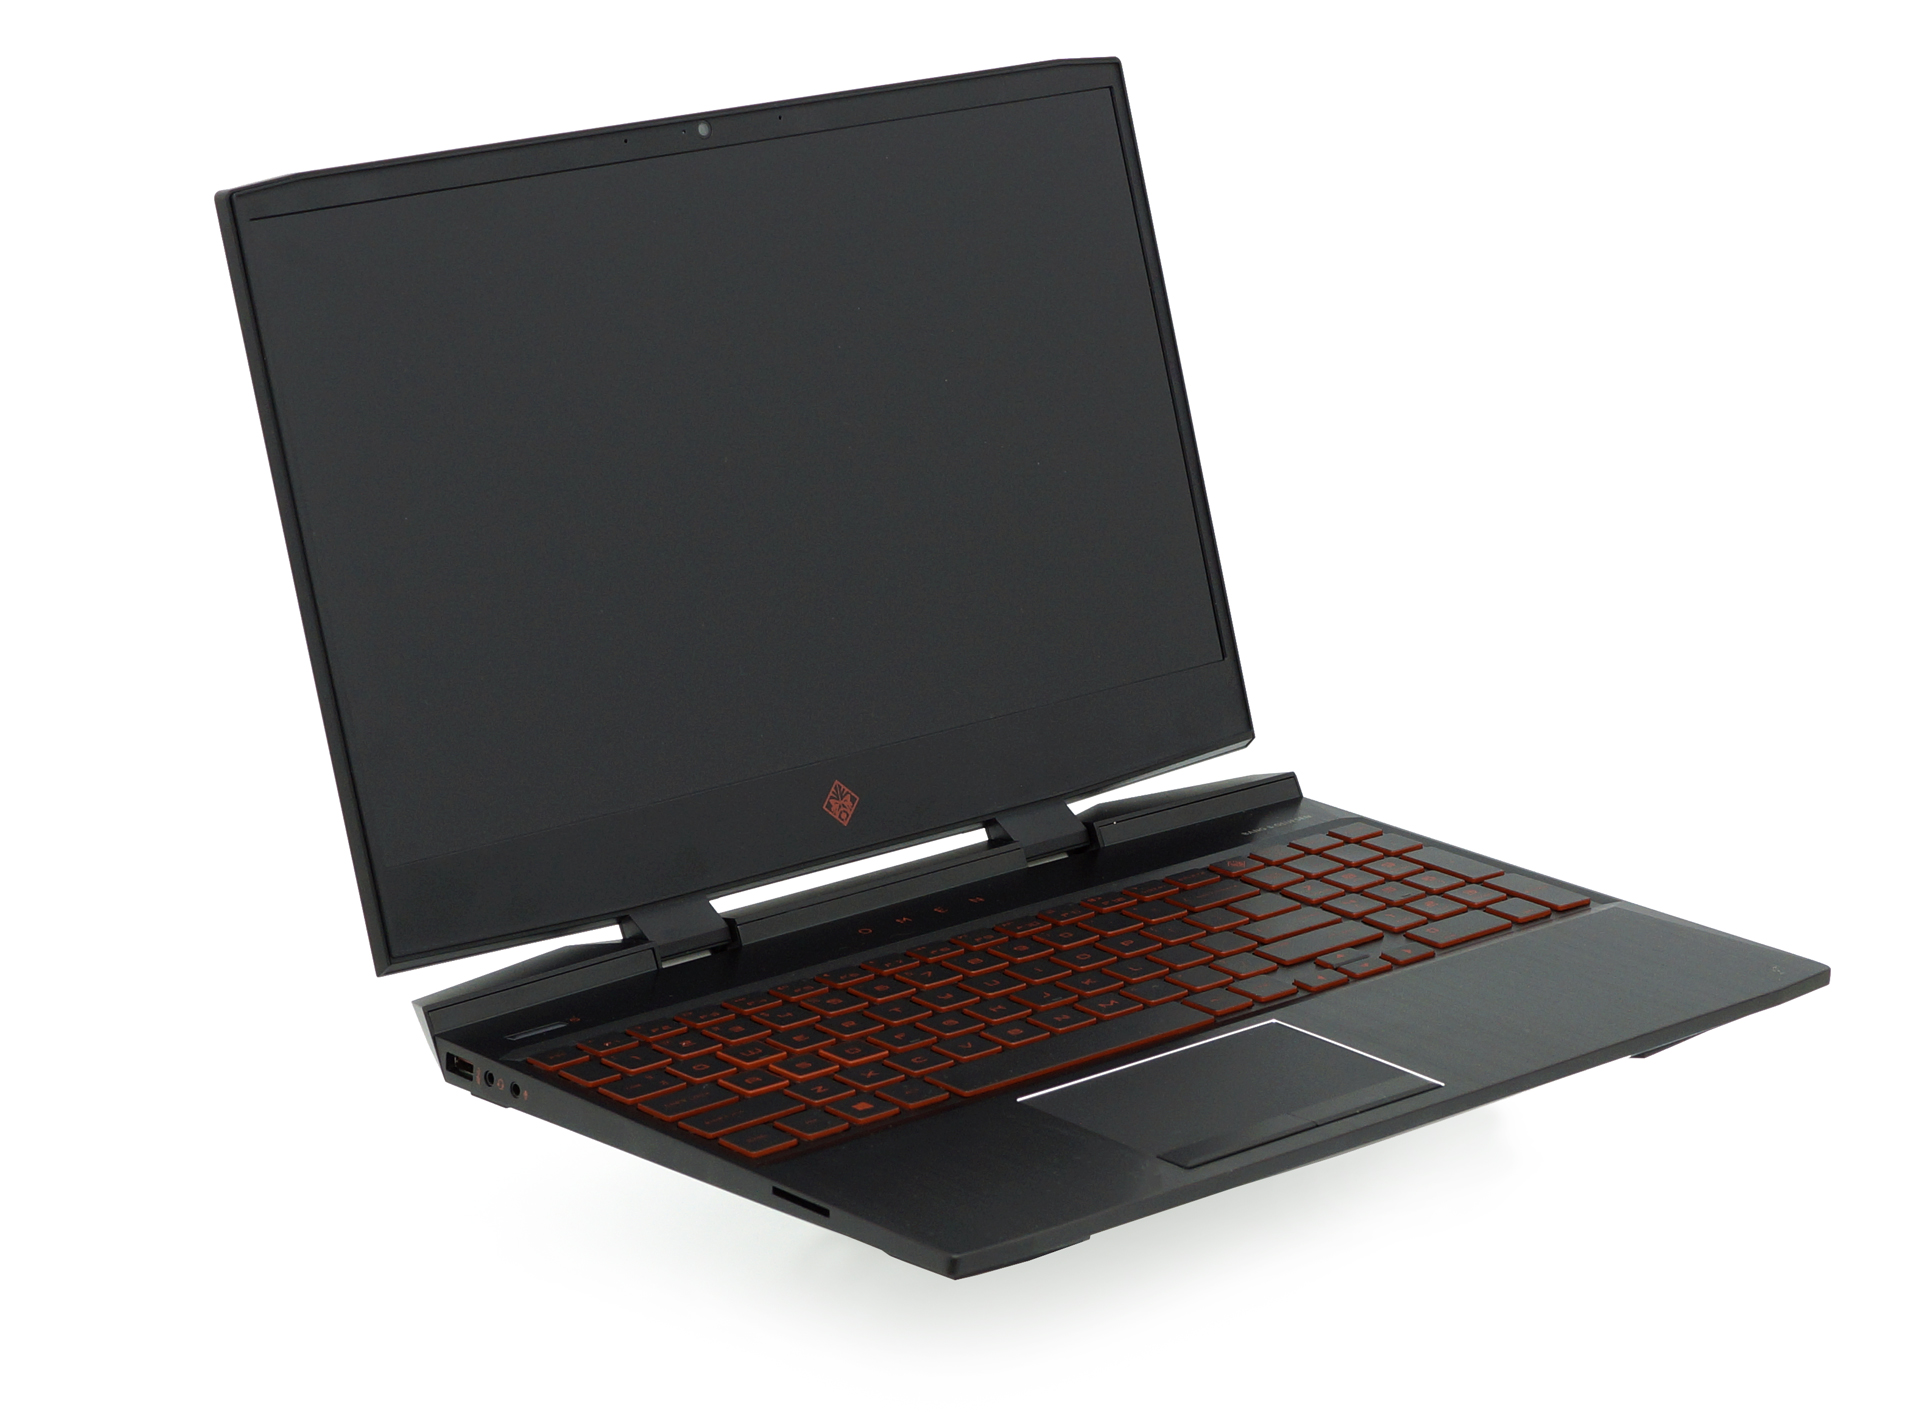 HP Omen 15 Review: Thin, Light and Extremely Powerful